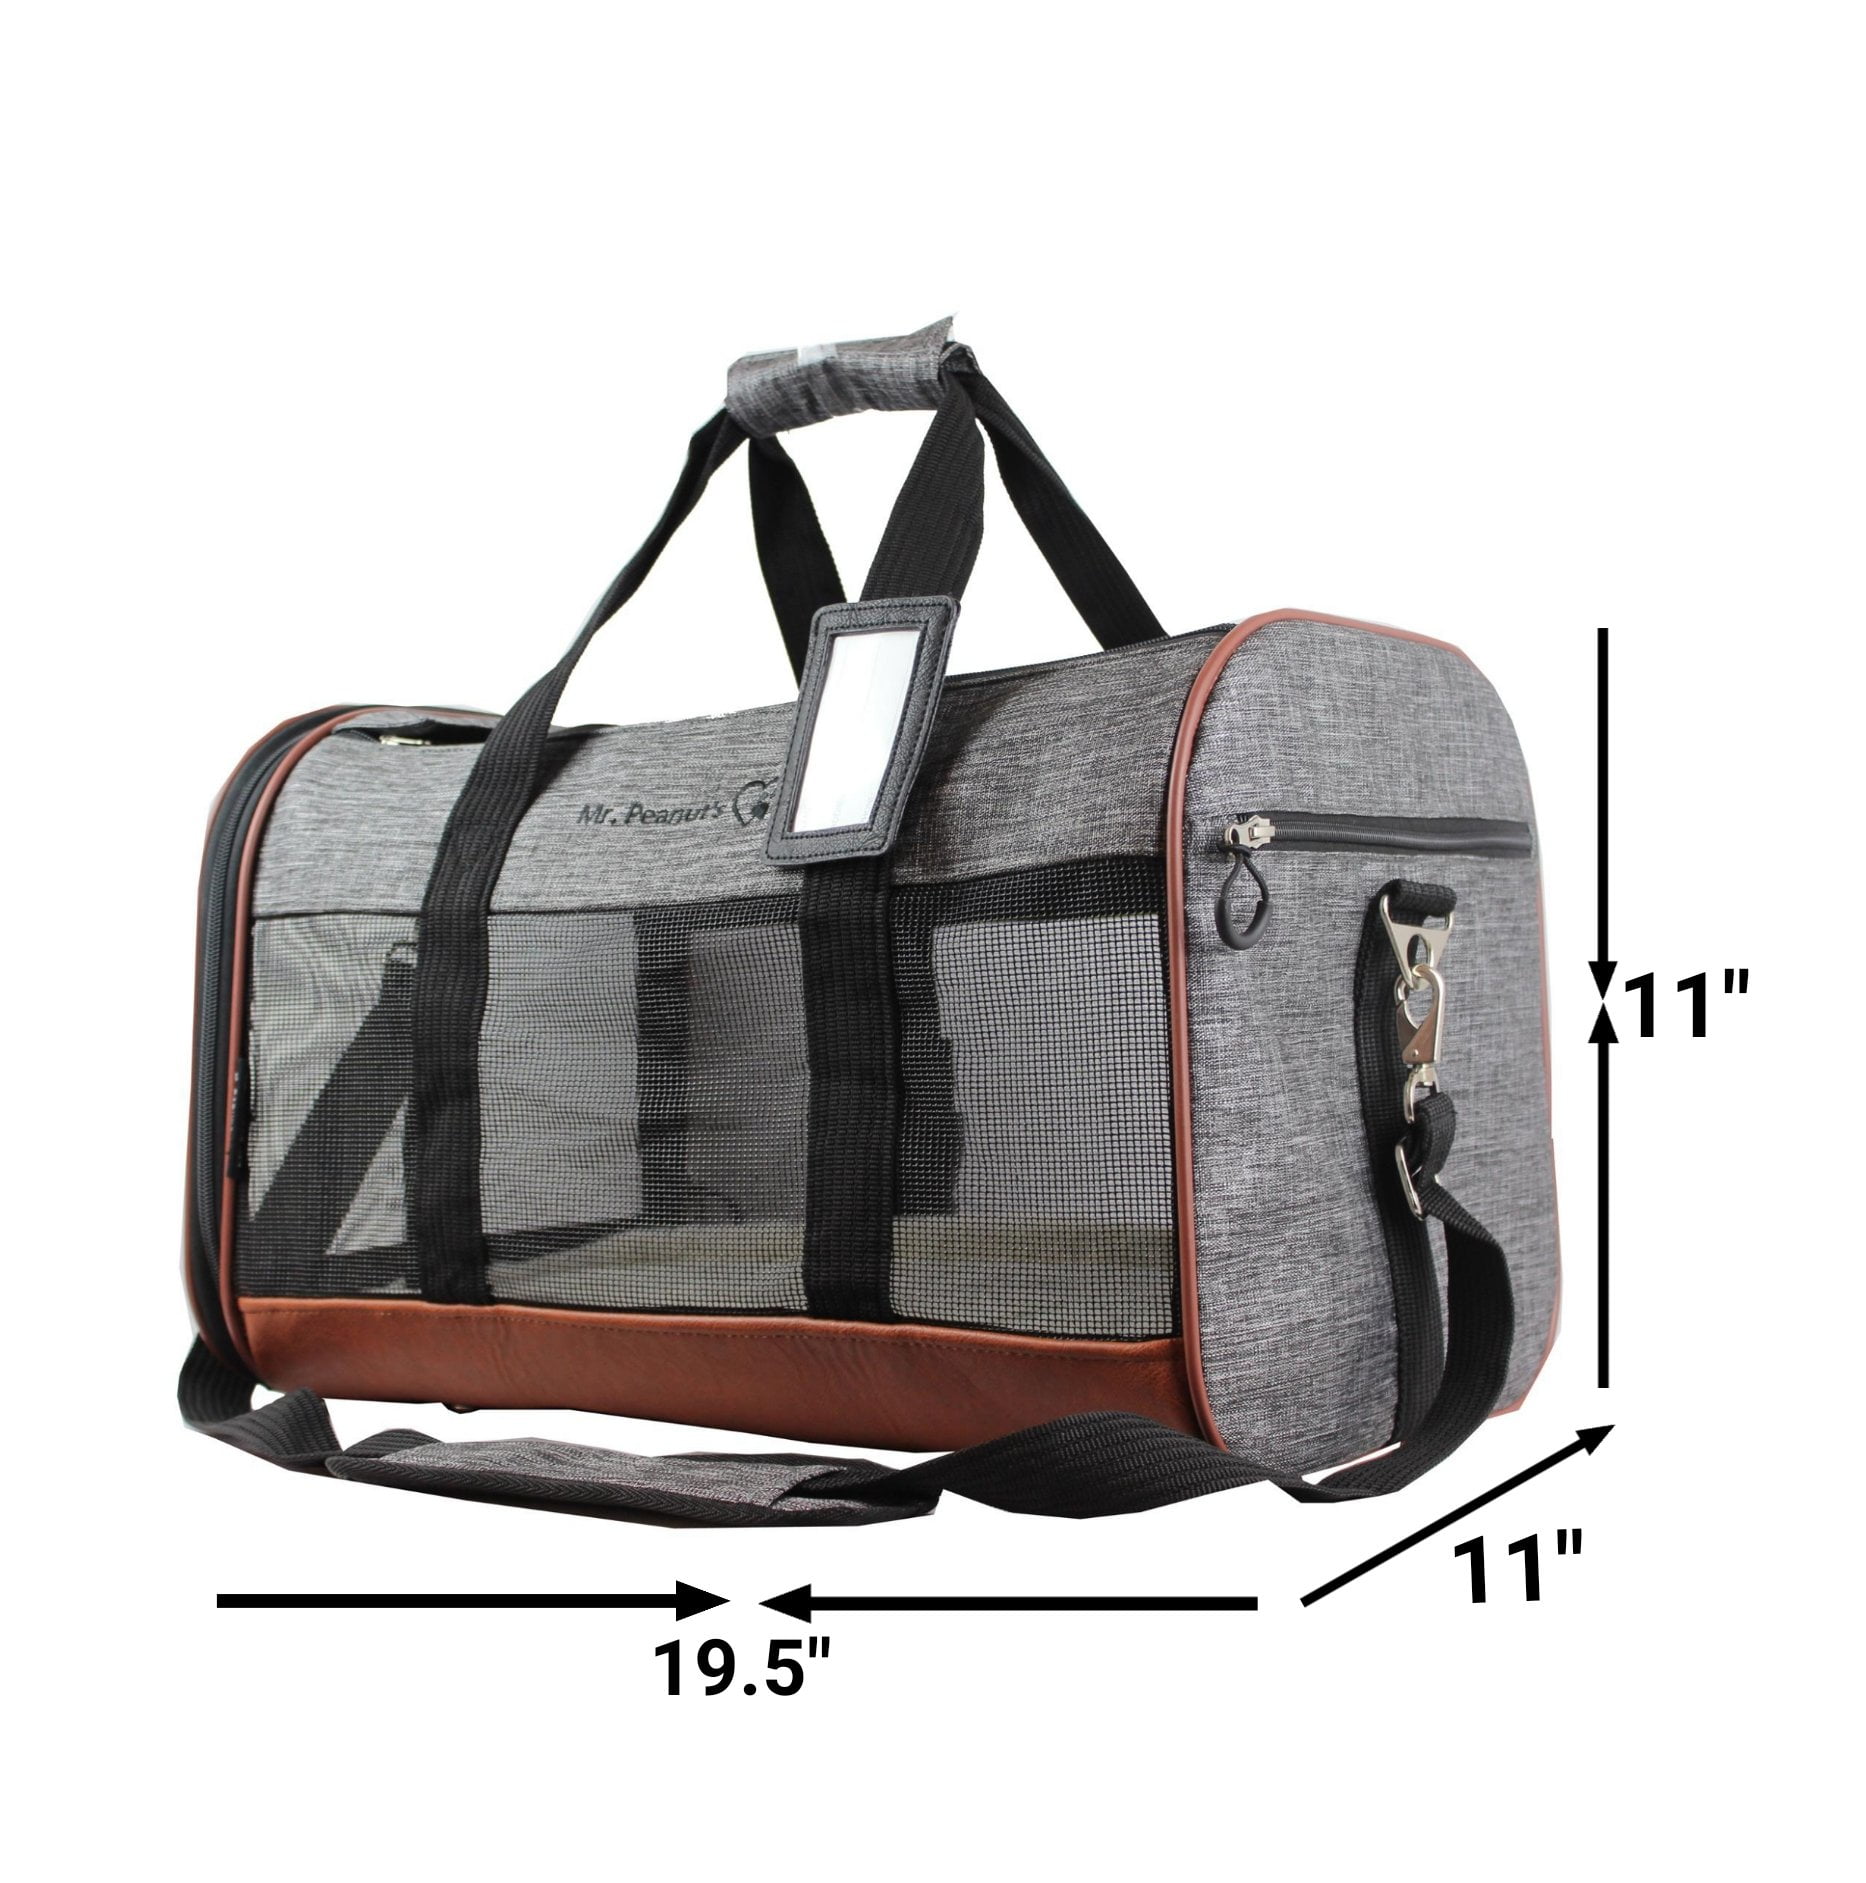 Soft Sided w/ Fleece Bed Premium Pet Carrier Airline Approved 